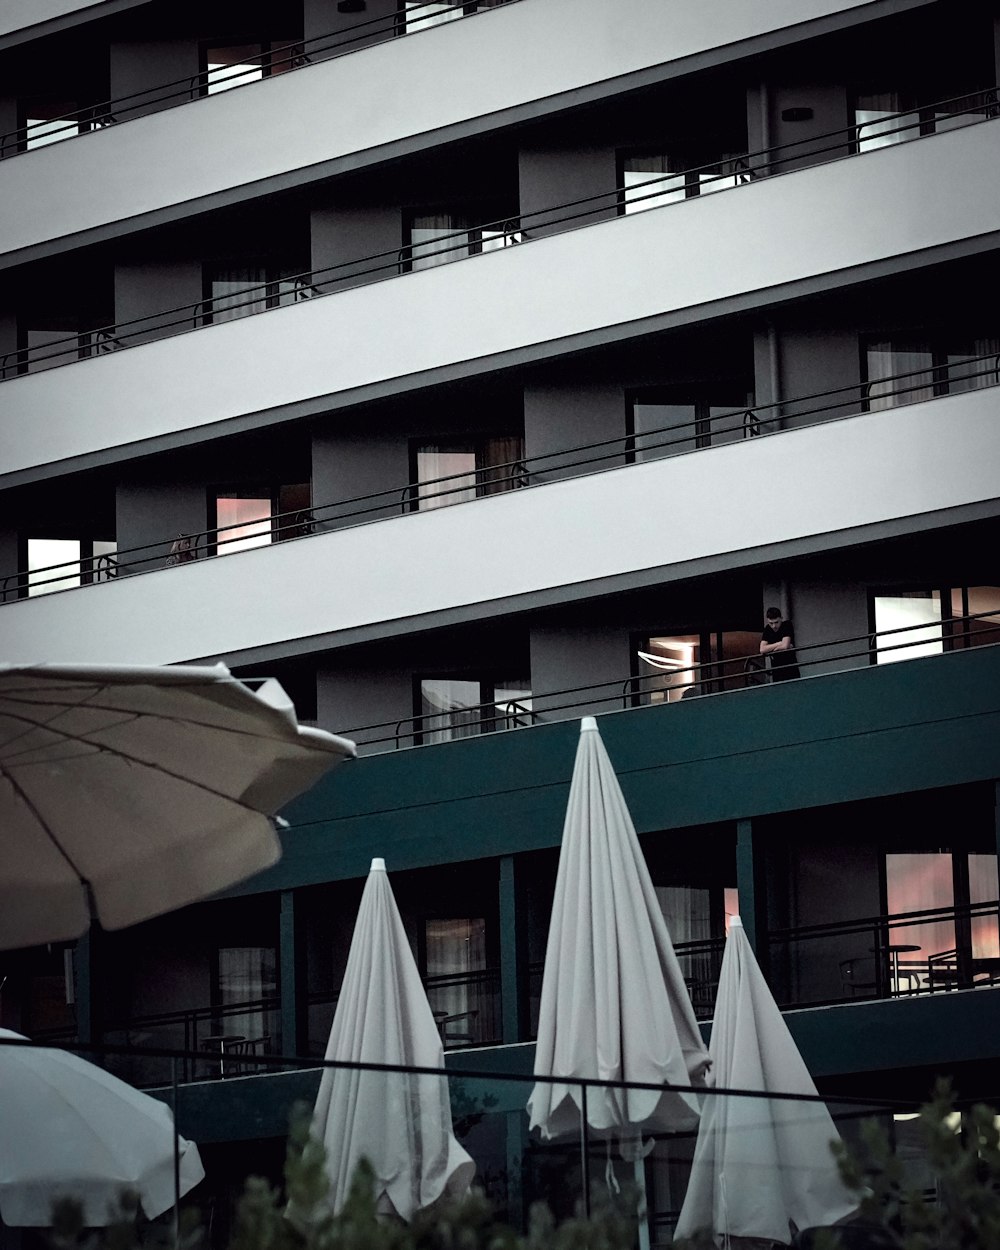 a group of white umbrellas sitting in front of a building